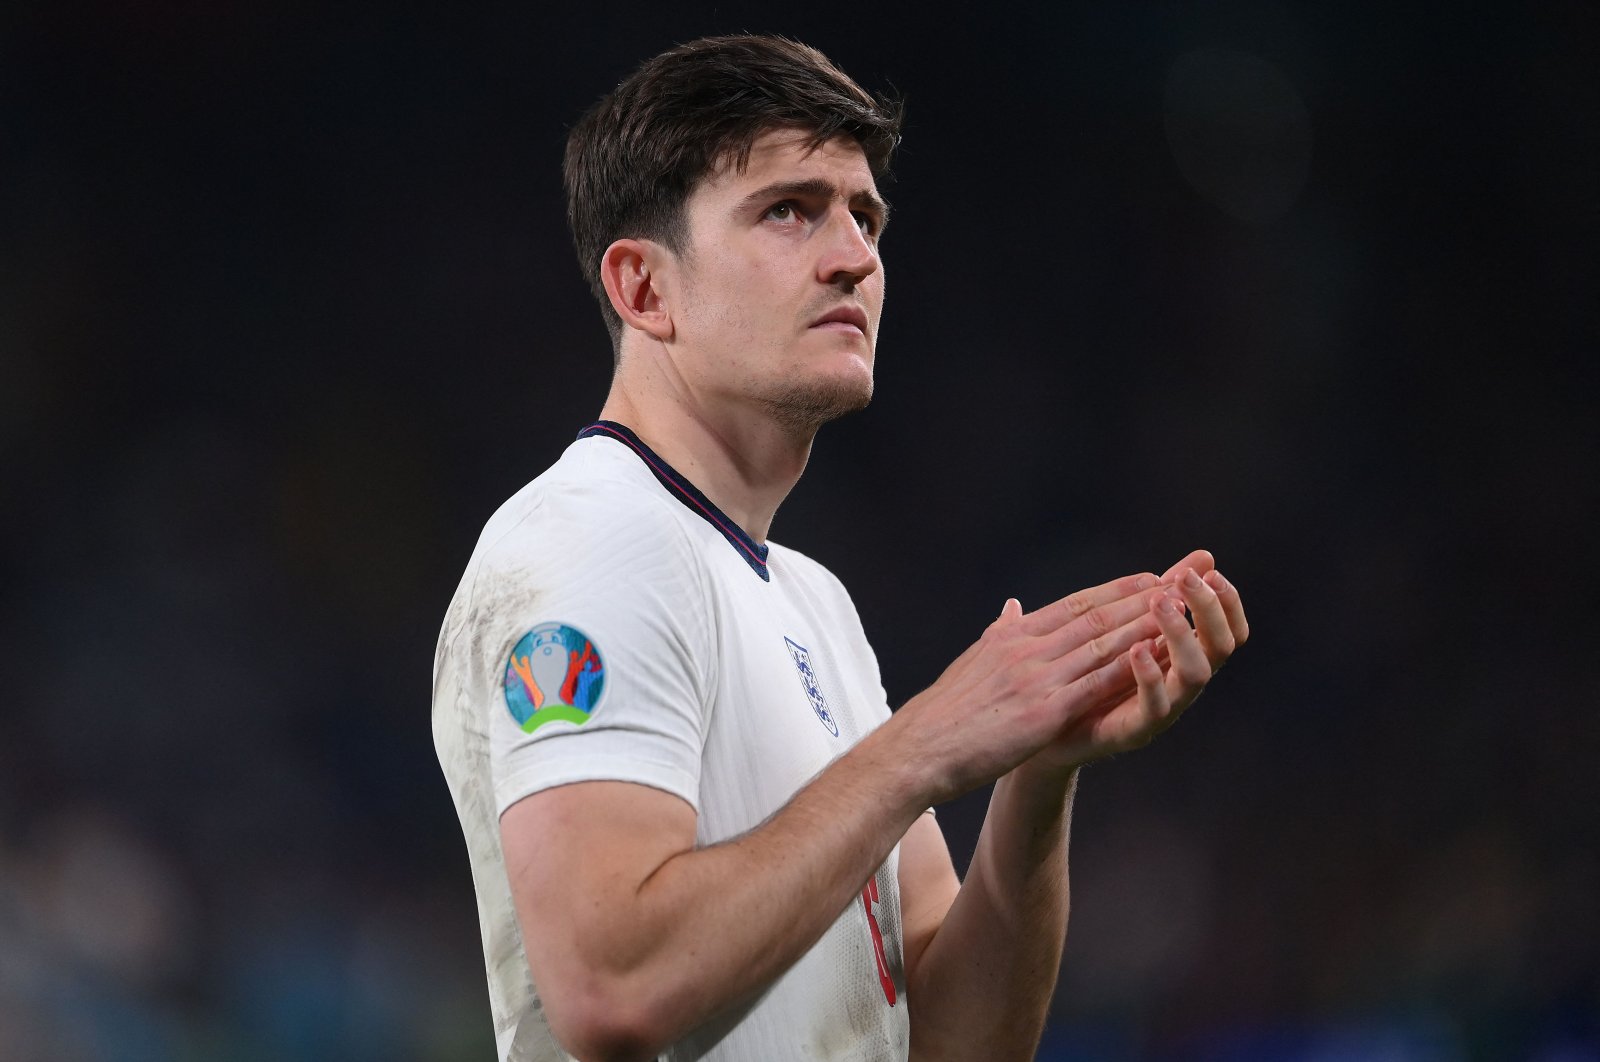 England defender Harry Maguire greets the fans after their loss in the UEFA Euro 2020 final football against Italy at the Wembley Stadium, London, U.K., July 11, 2021. (AFP Photo)